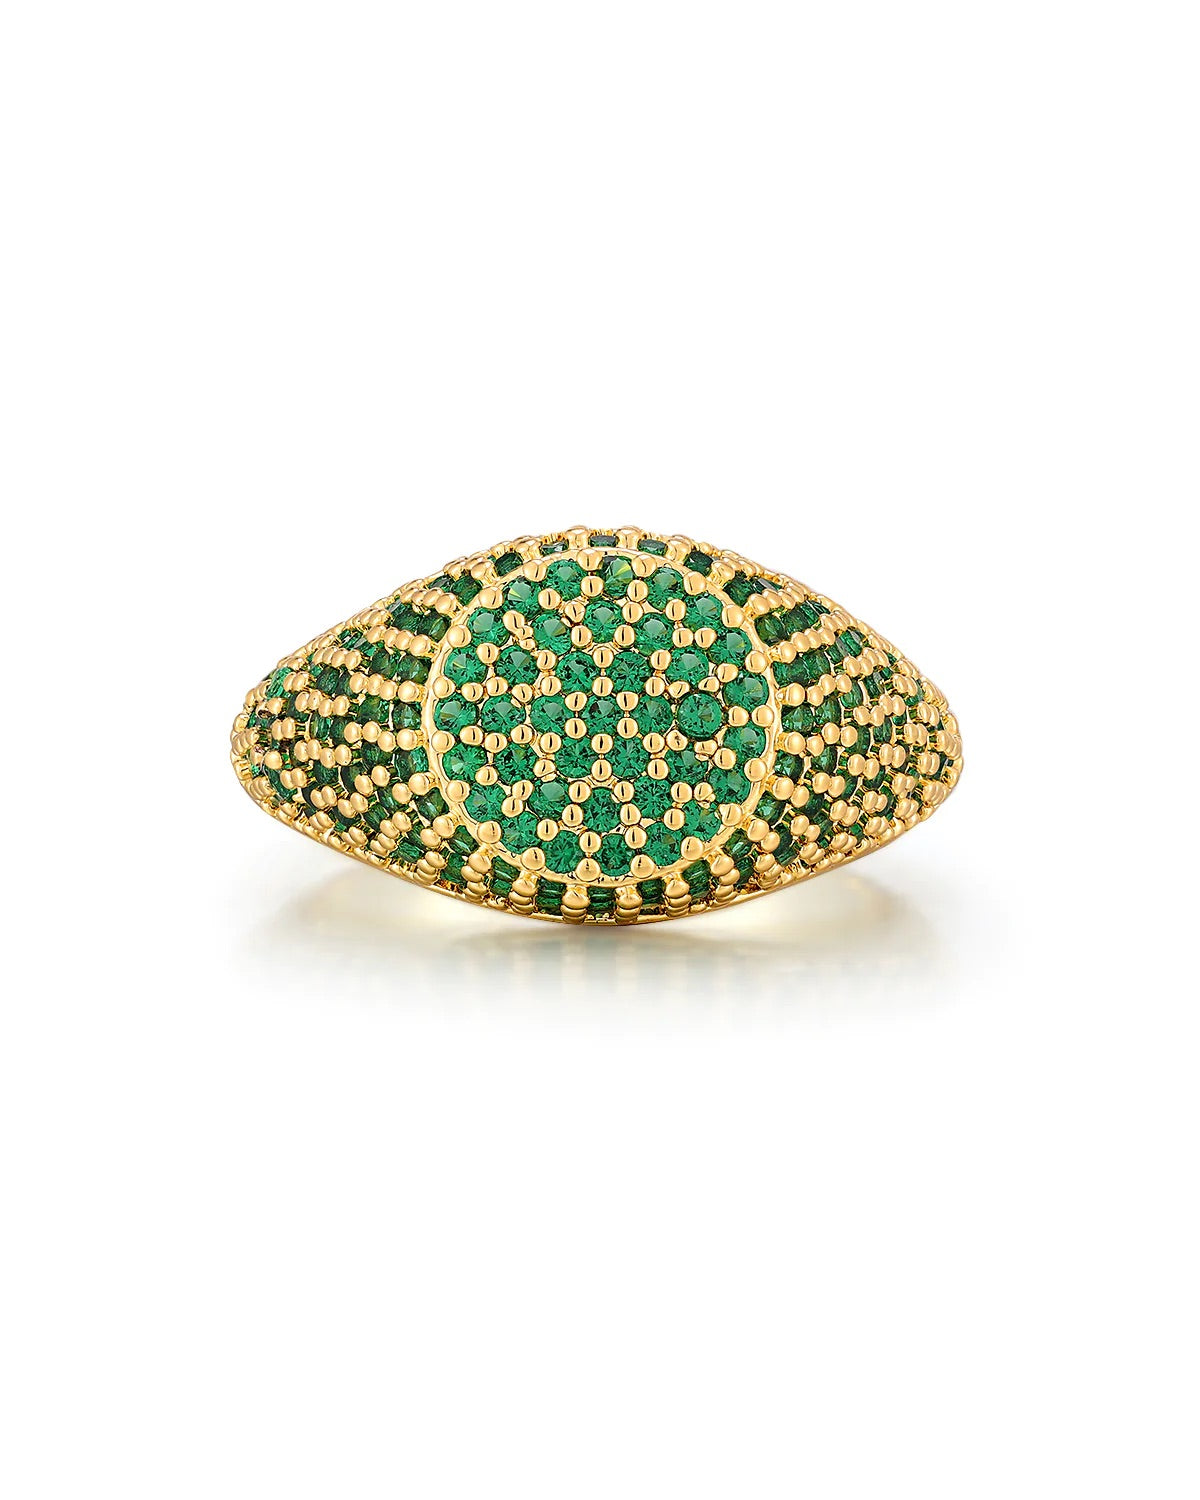 LUV AJ Pave Signet Emerald Green Ring in Gold